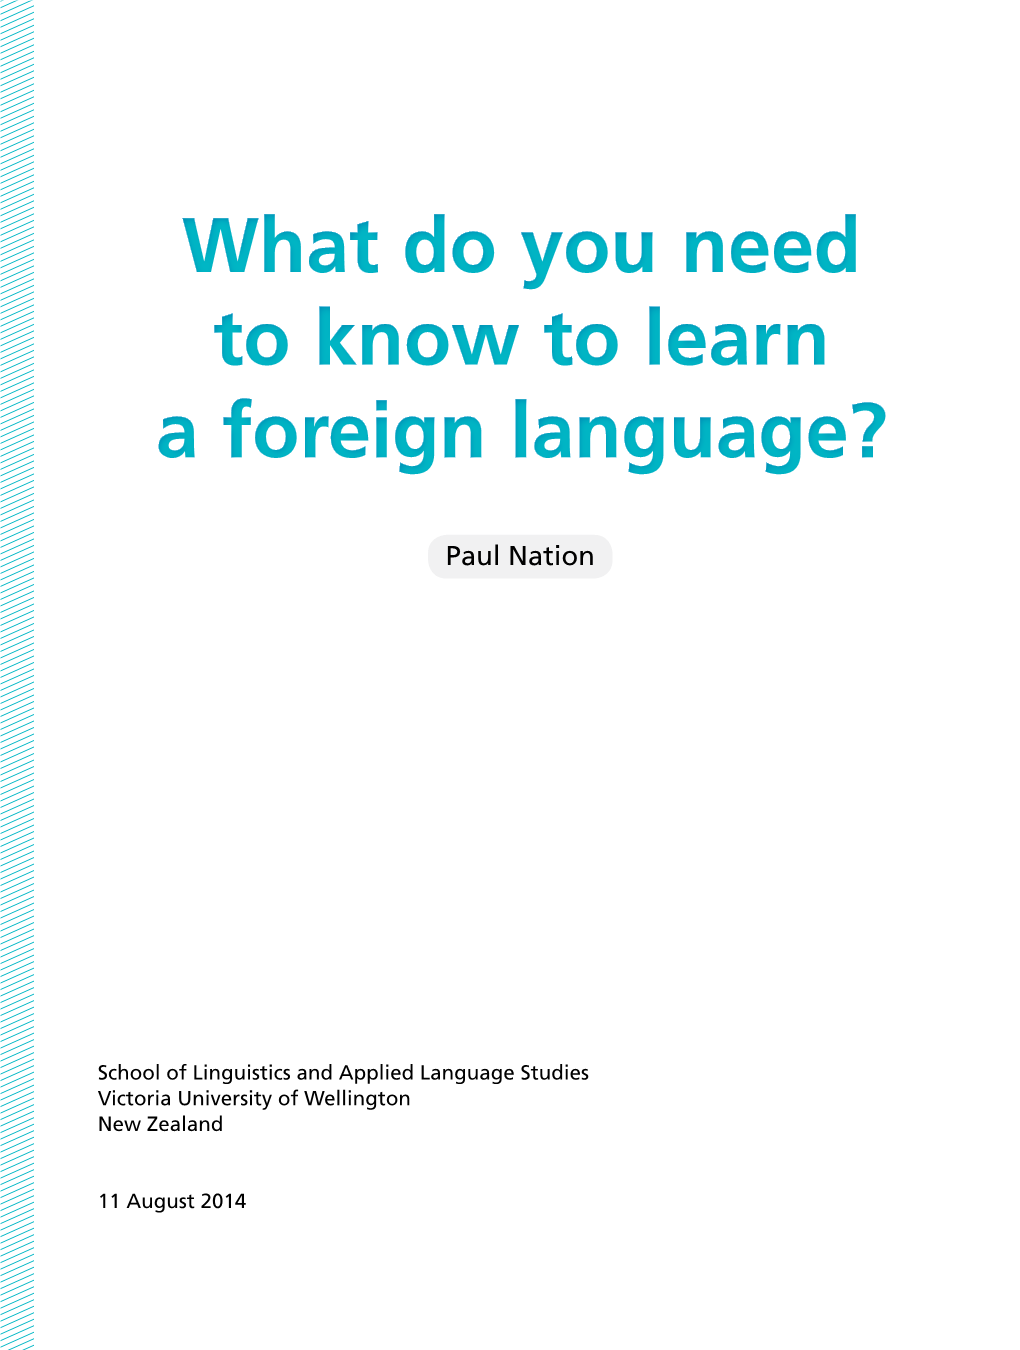 What Do You Need to Know to Learn a Foreign Language?